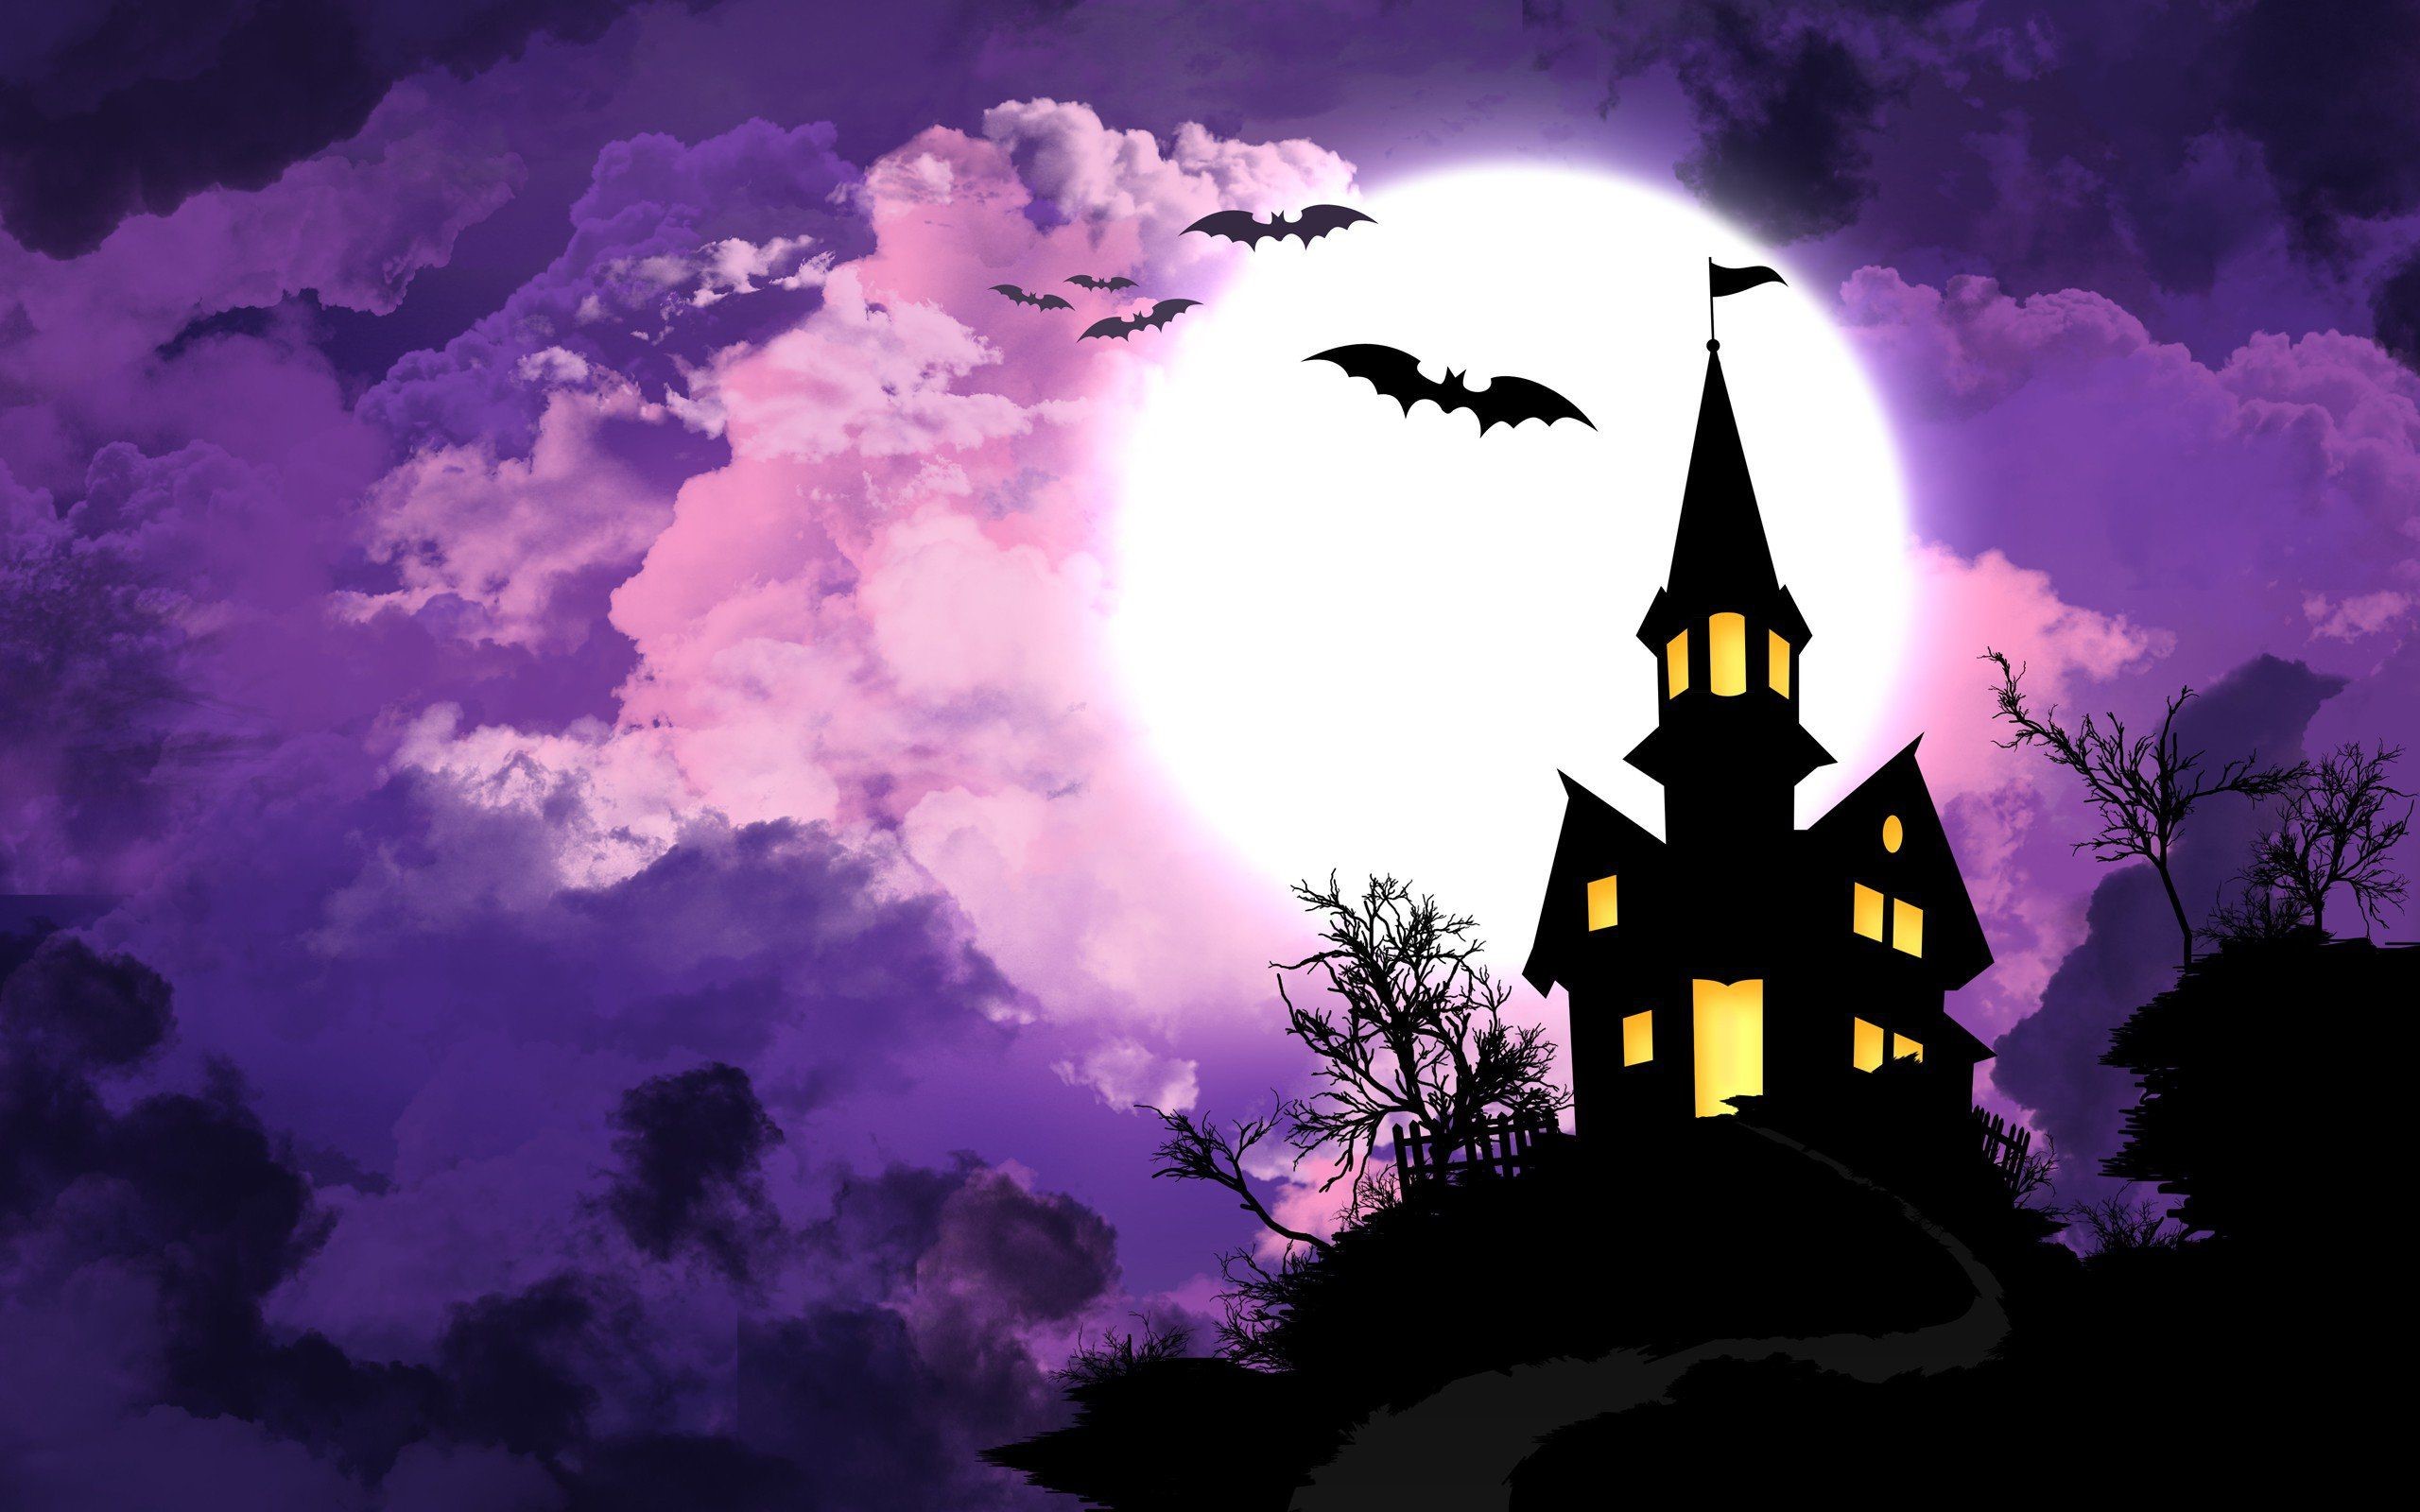 Halloween Scary House In The Moonlight Hd Wallpaper - Halloween Background High Quality - HD Wallpaper 